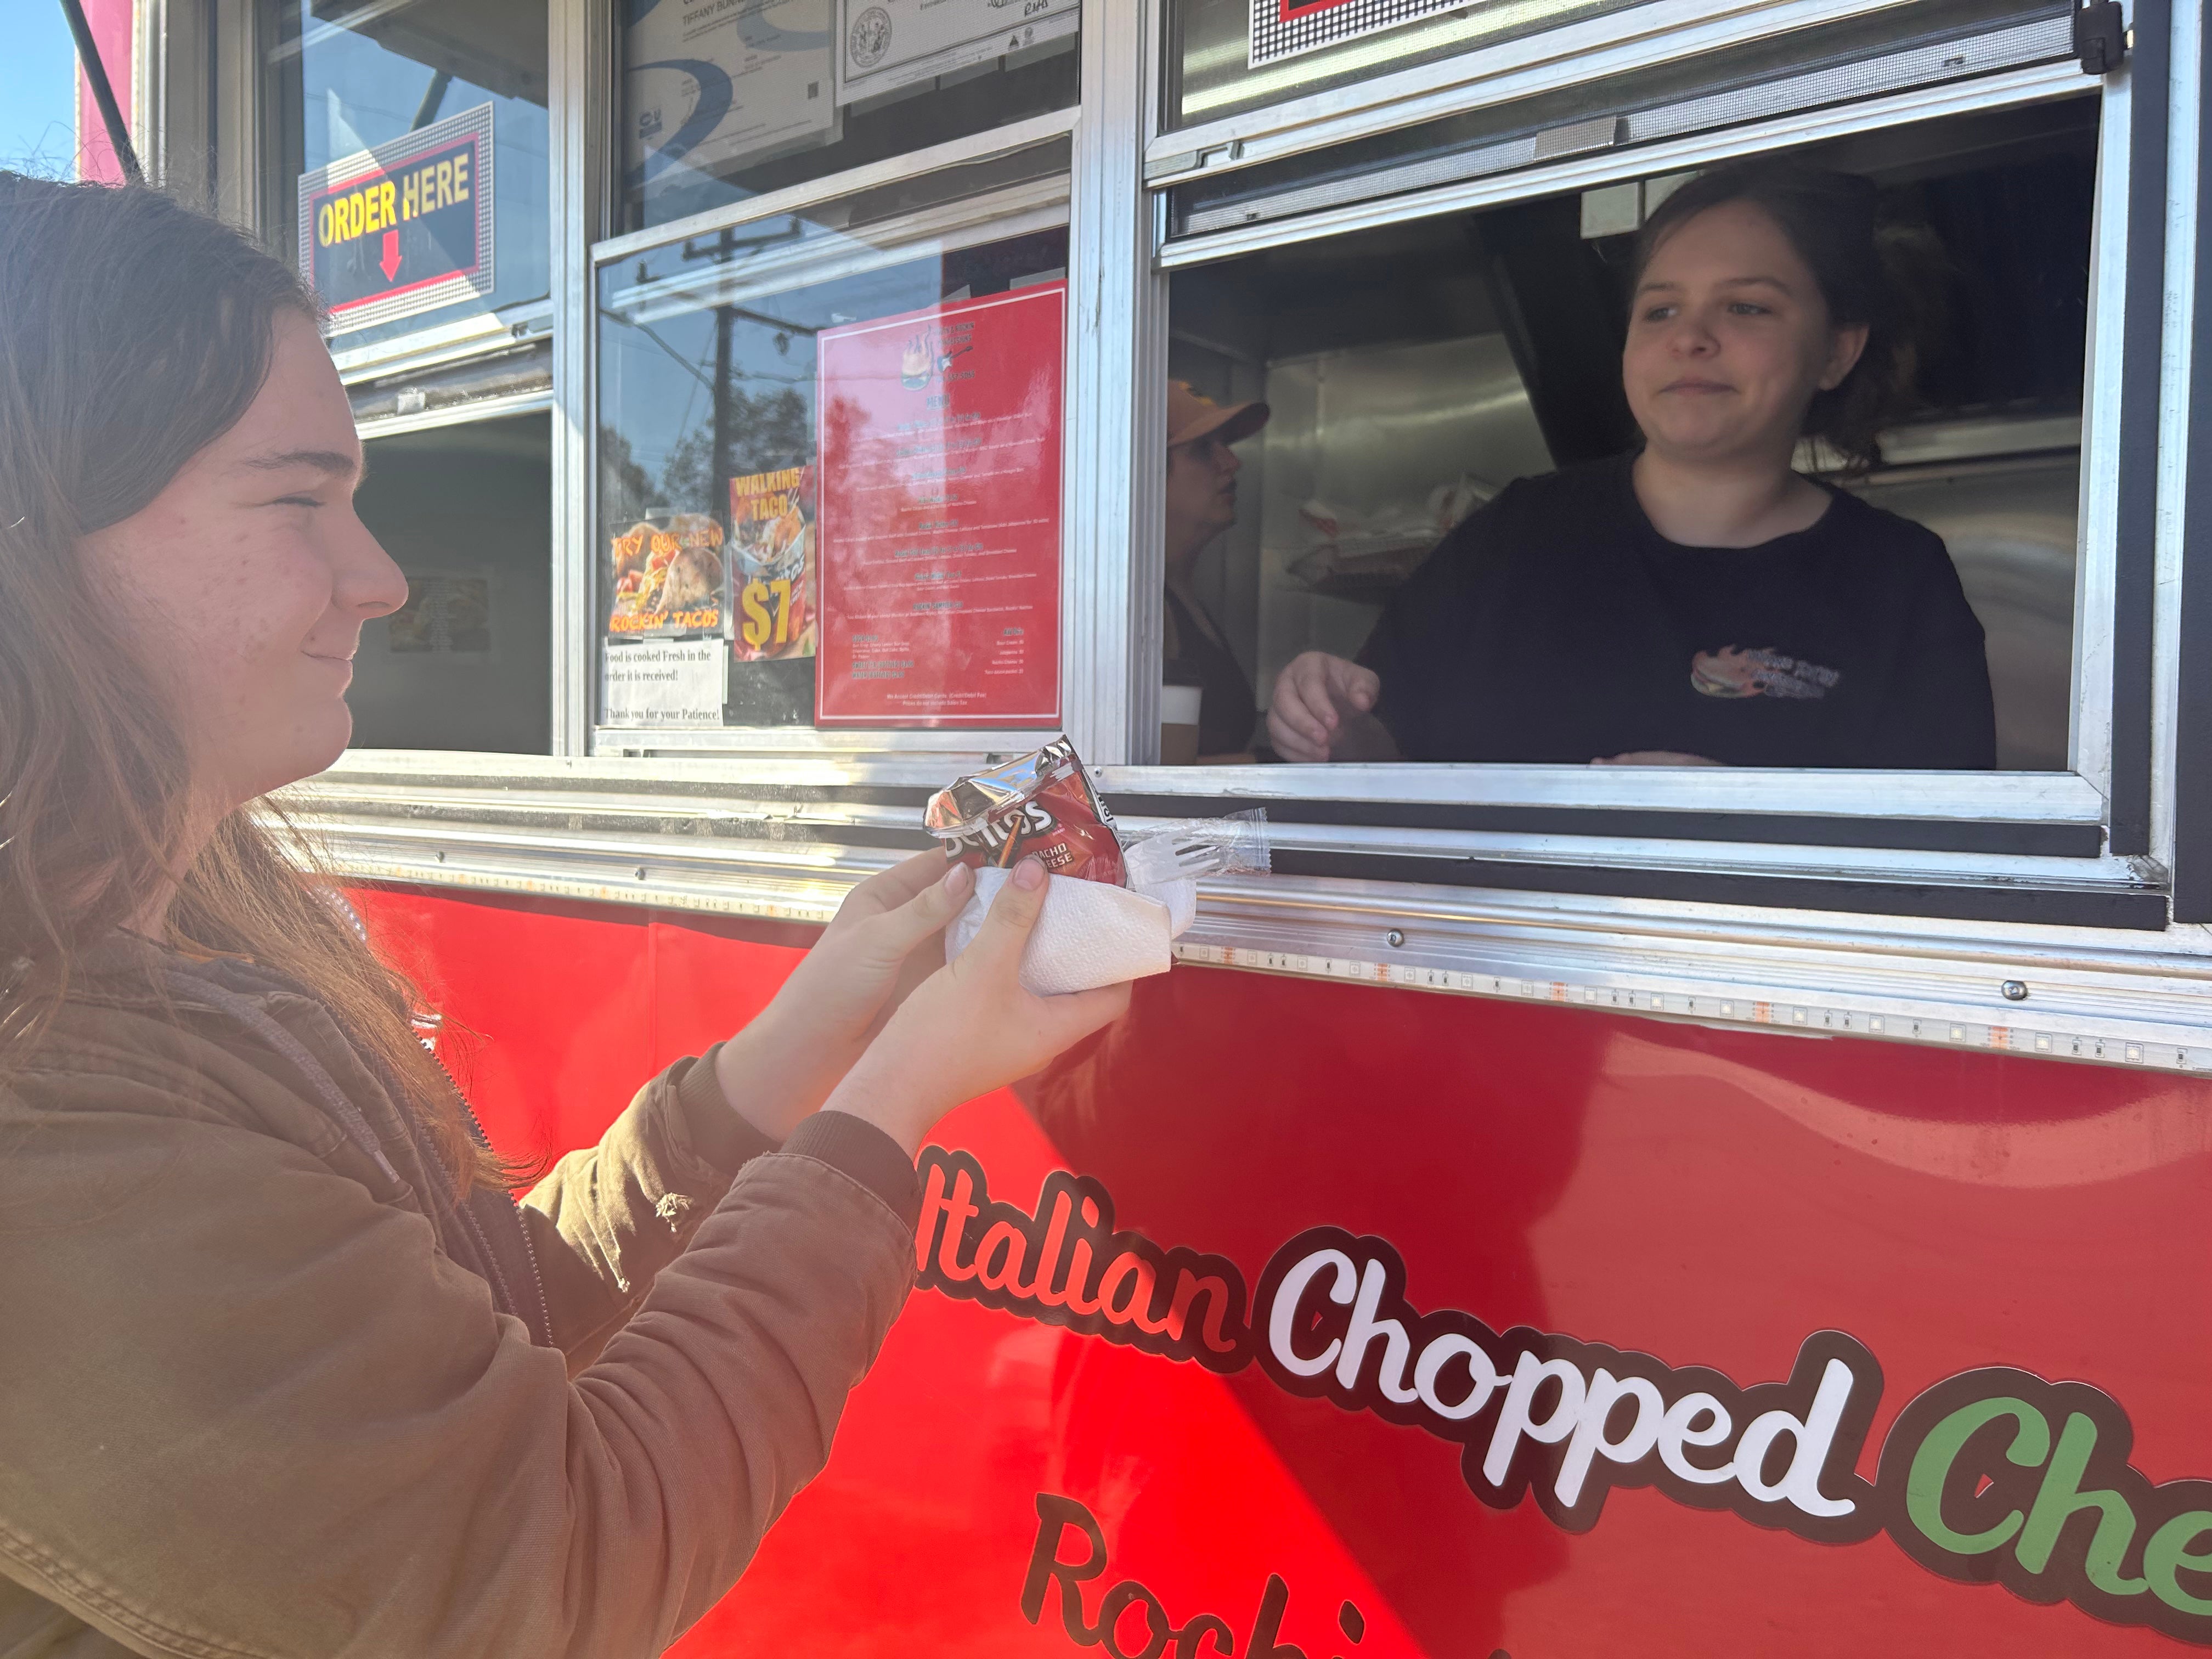 Age is just a number: Teen finds success with food truck – Salisbury Post